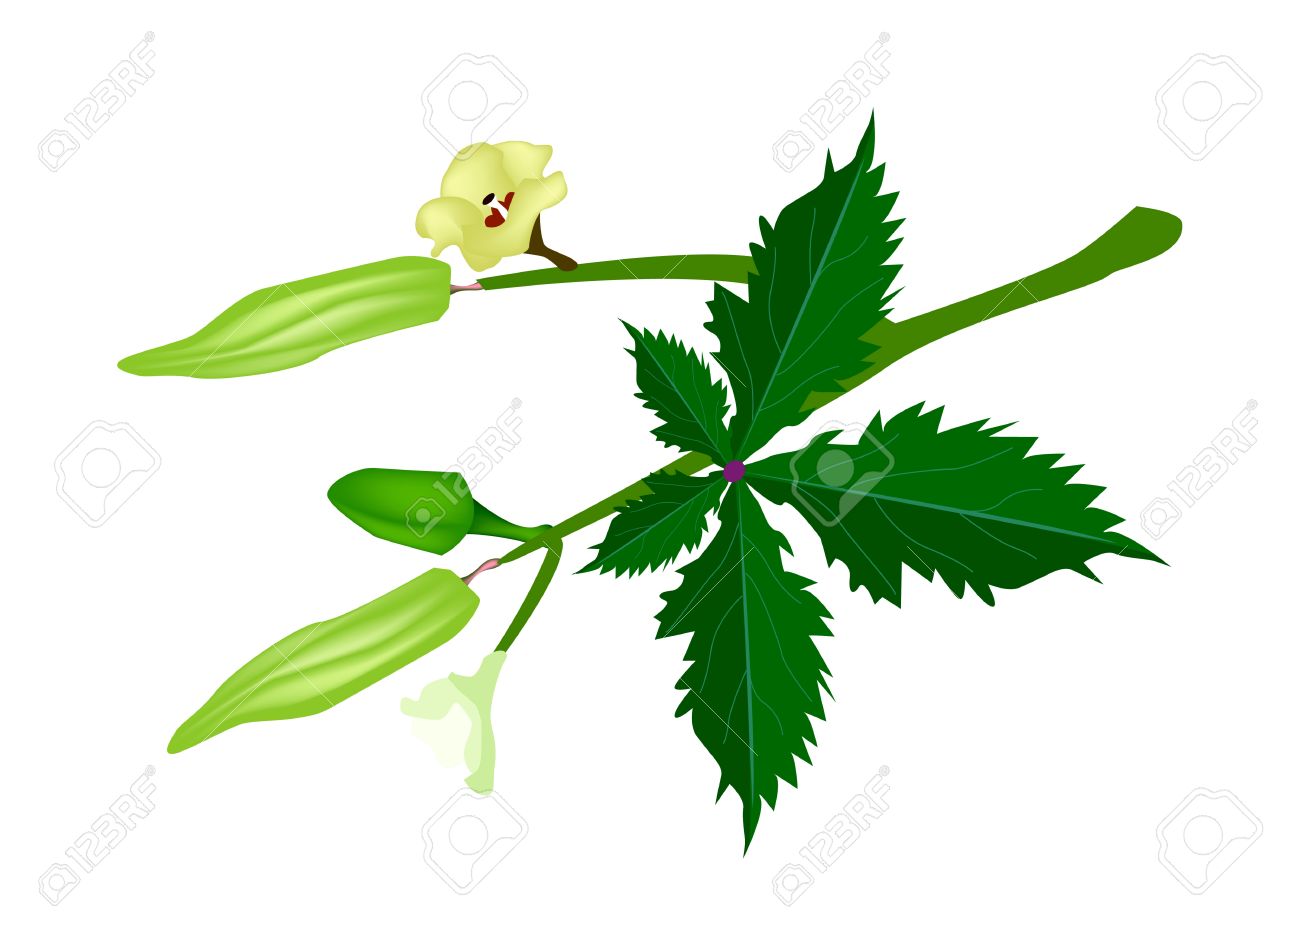 Okra Blossom Images & Stock Pictures. Royalty Free Okra Blossom.